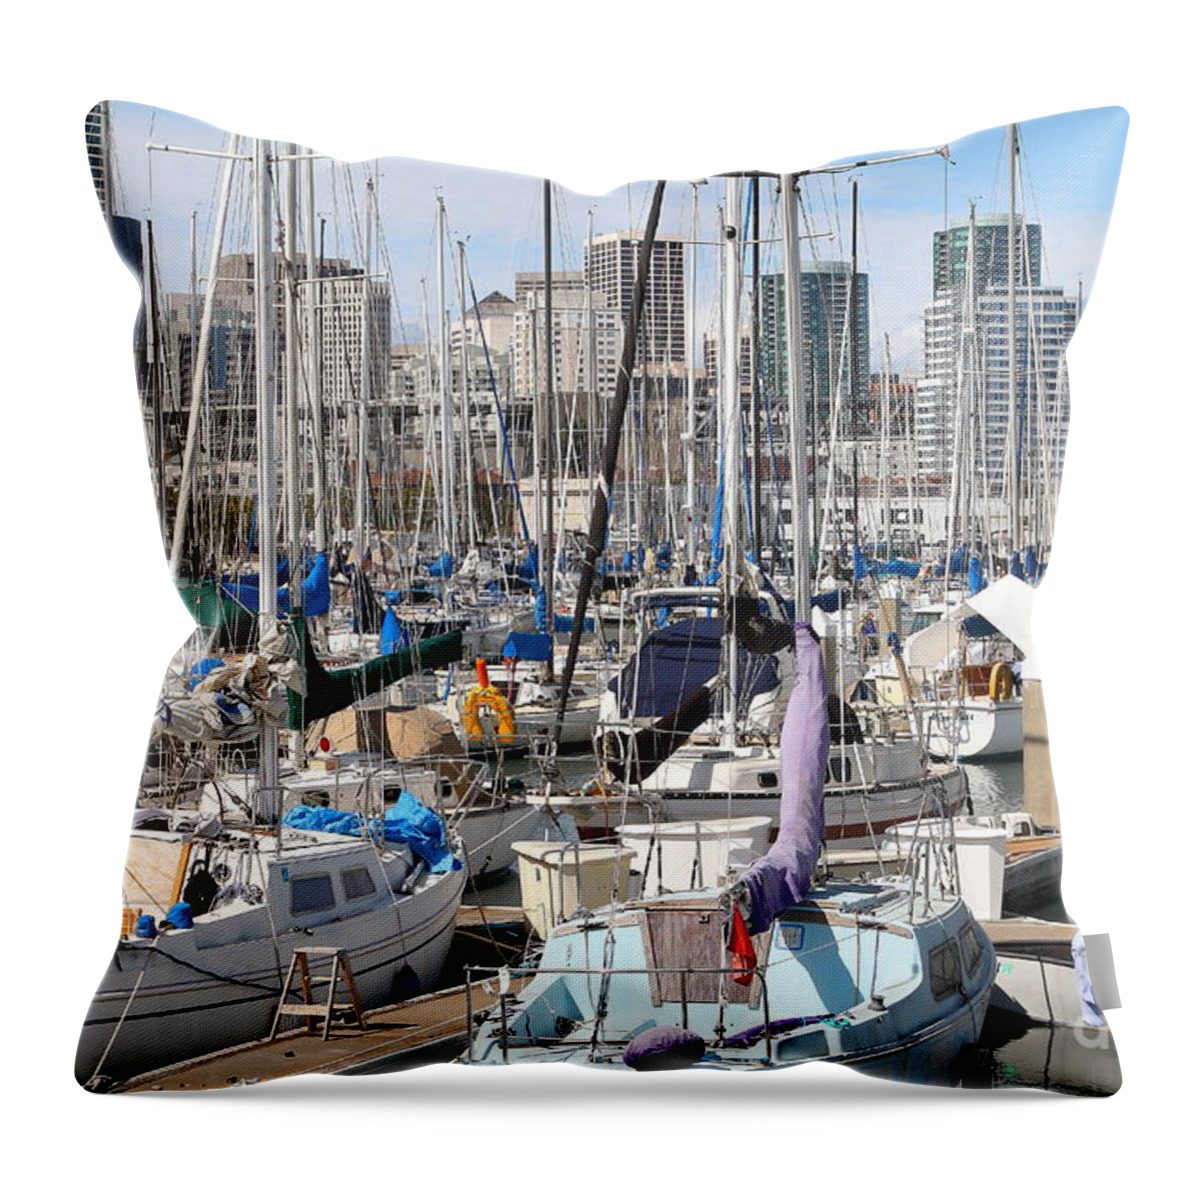 San Francisco Throw Pillow featuring the photograph Sail Boats at San Francisco China Basin Pier 42 With The San Francisco Skyline . 7D7675 by Wingsdomain Art and Photography